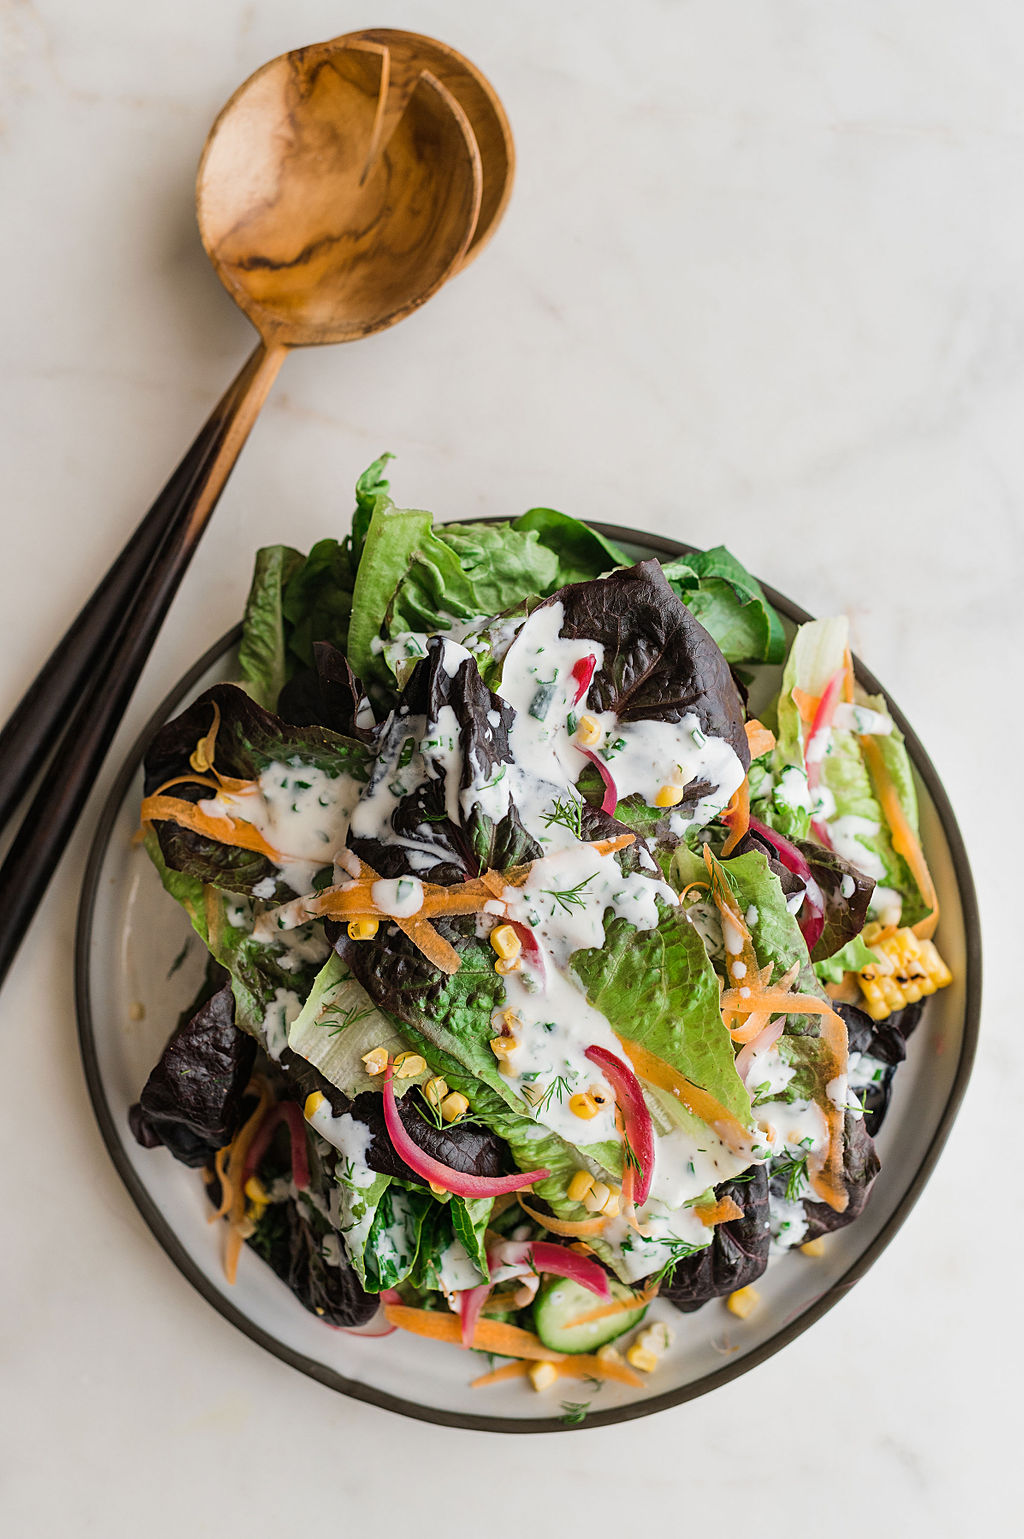 Little Gem Salad with Dilly Ranch Dressing